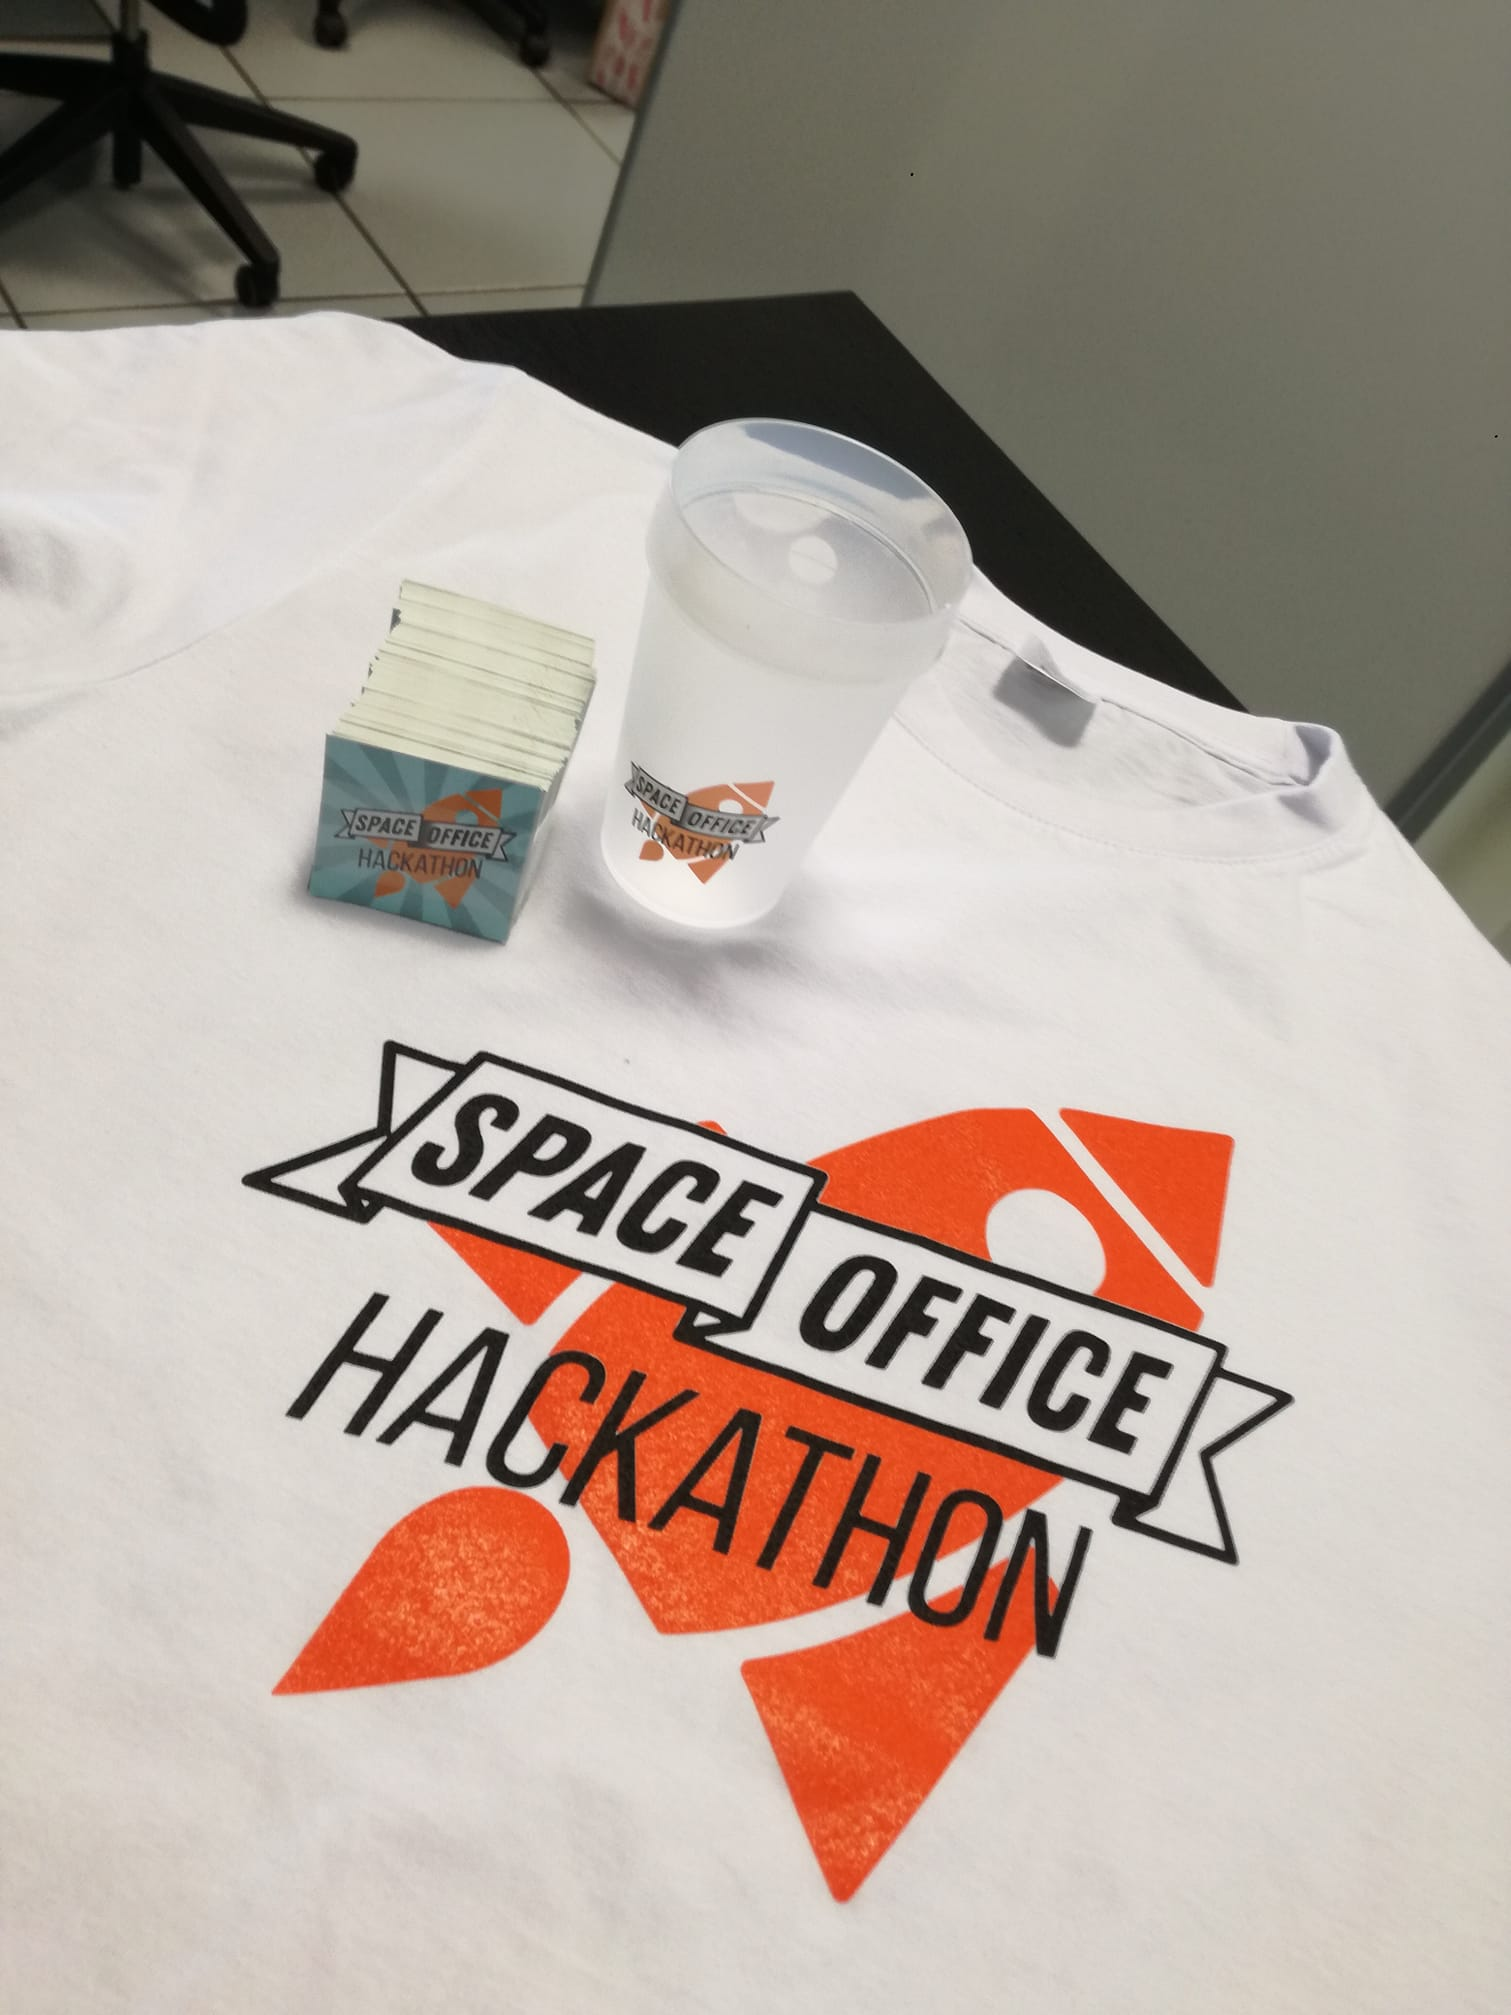 Space office event goodies picture